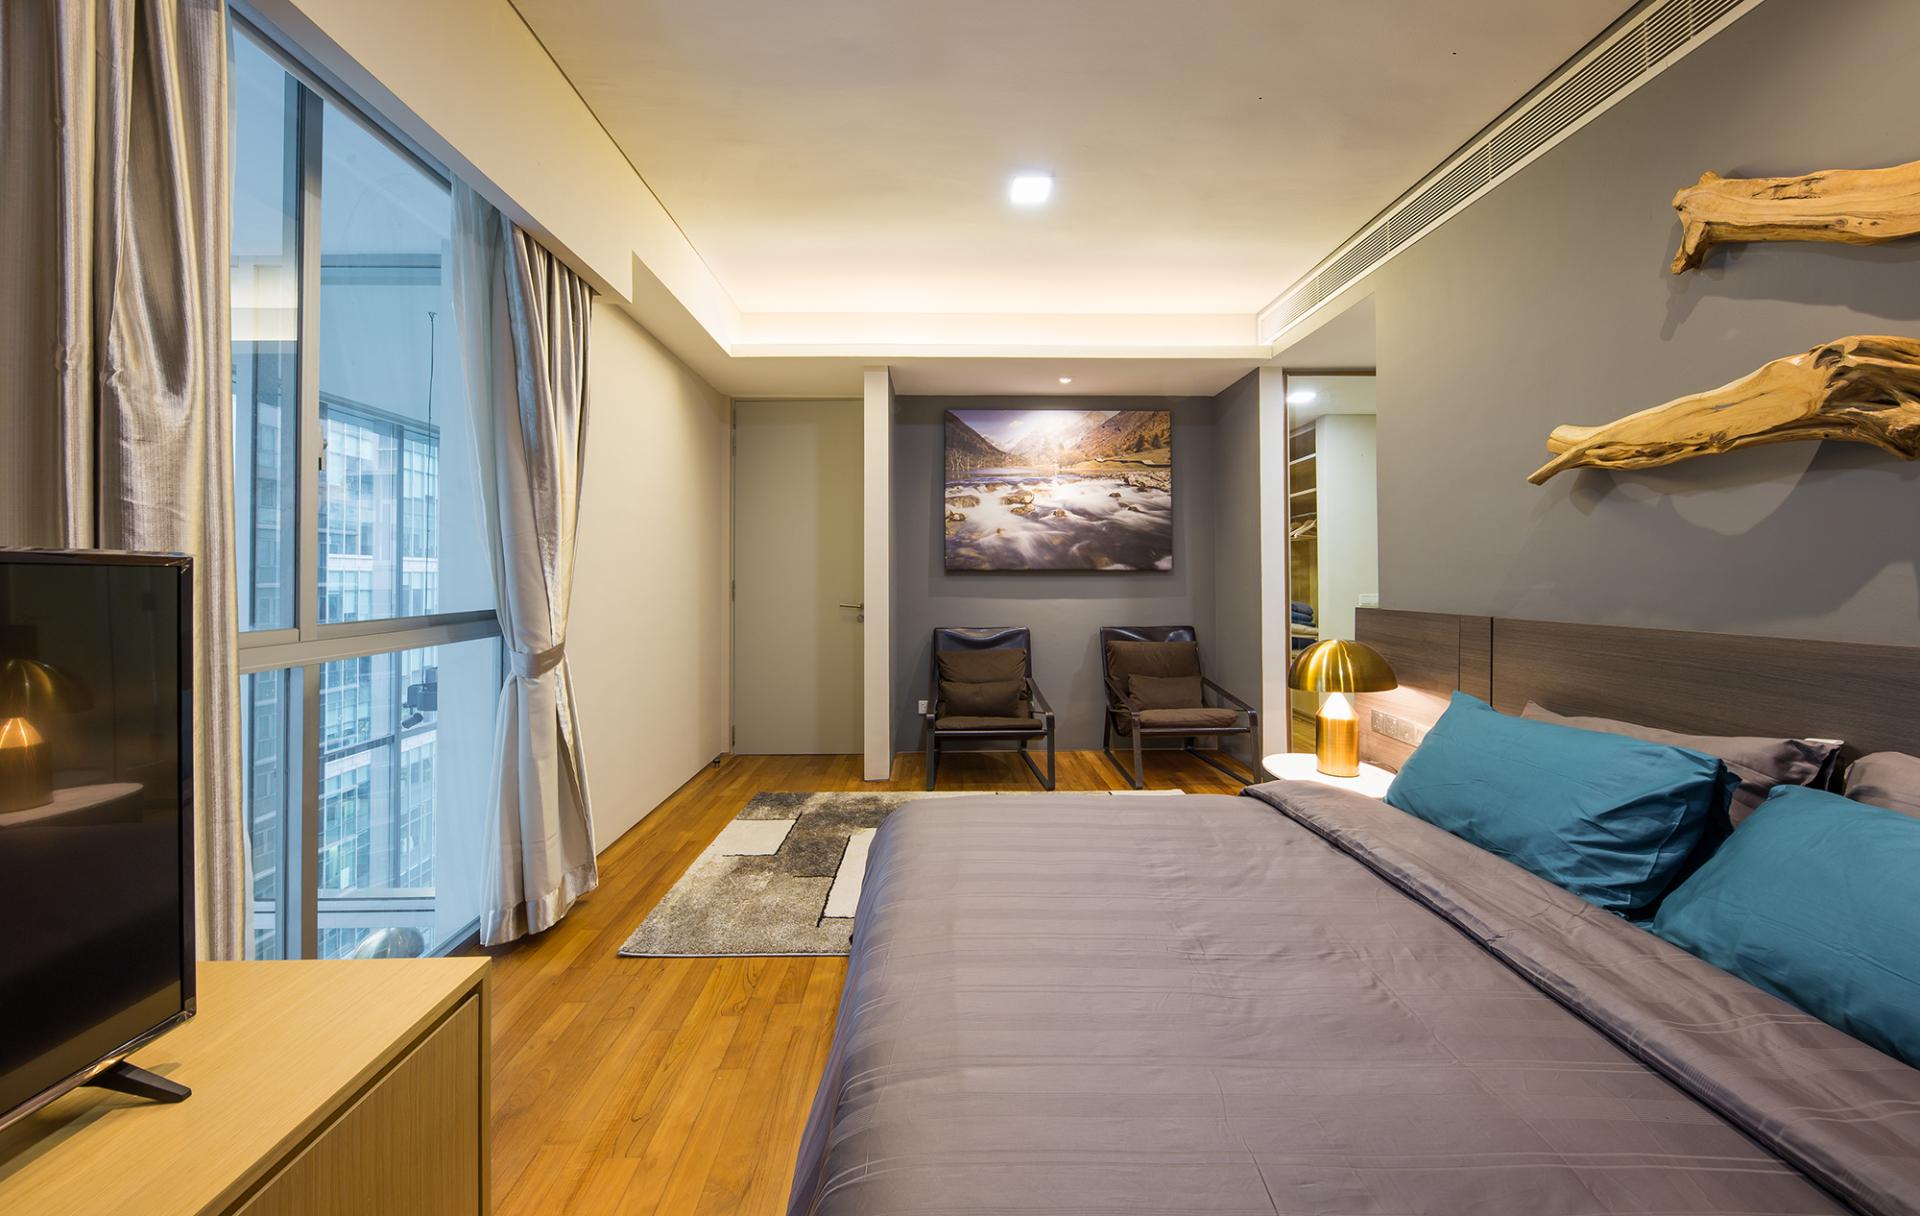 Explore a Grand Natural World Inside this Luxurious KL Apartment